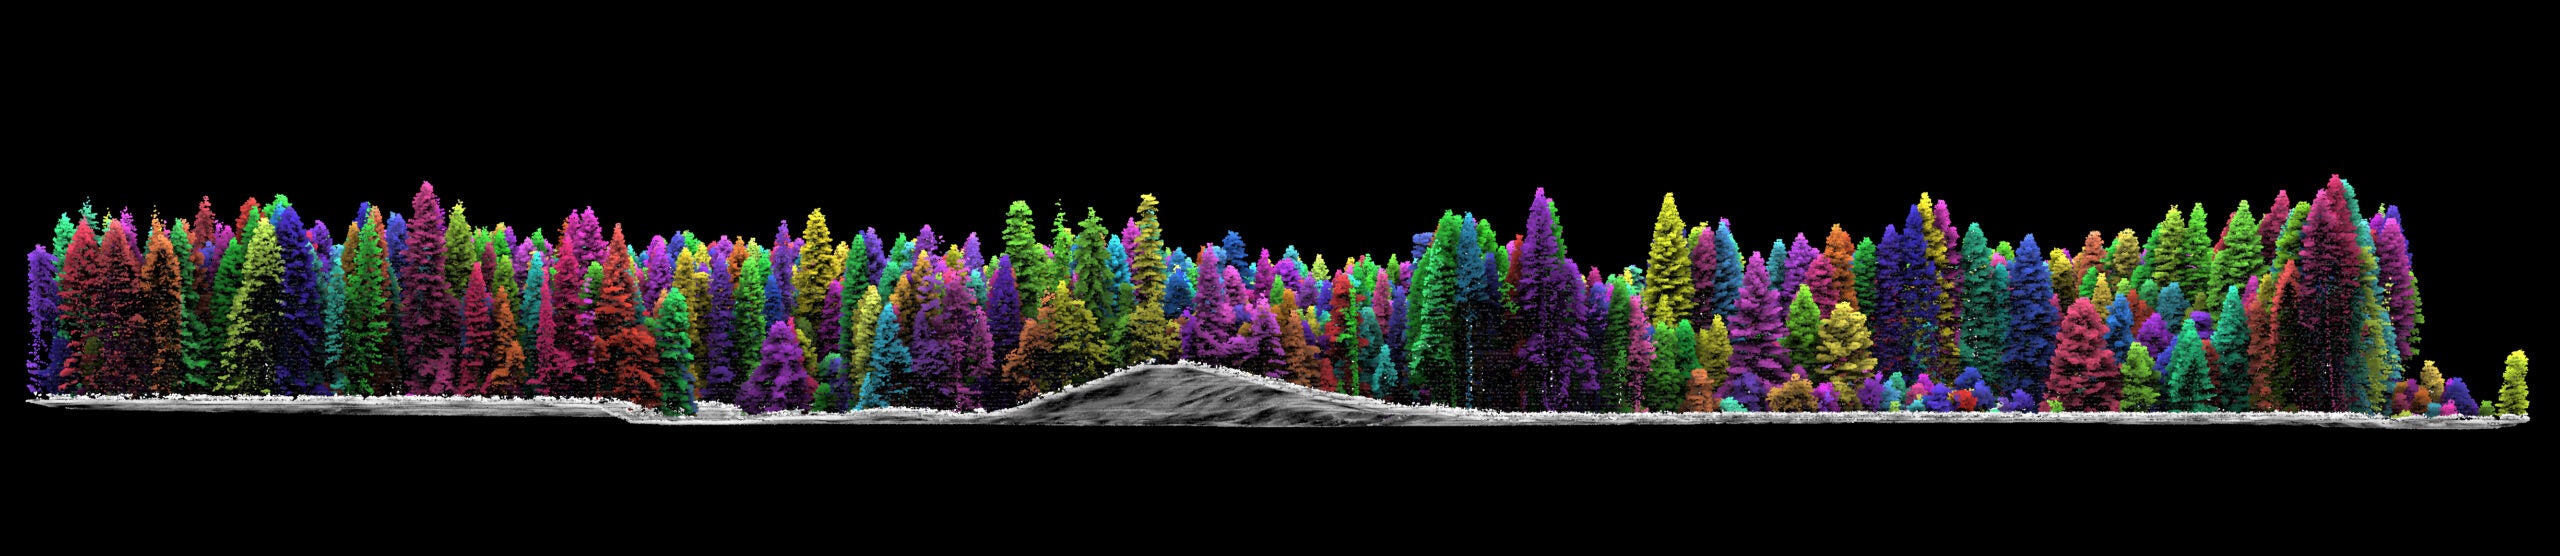 Multicolored trees from Yosemite's forests mapped from a lateral view on black